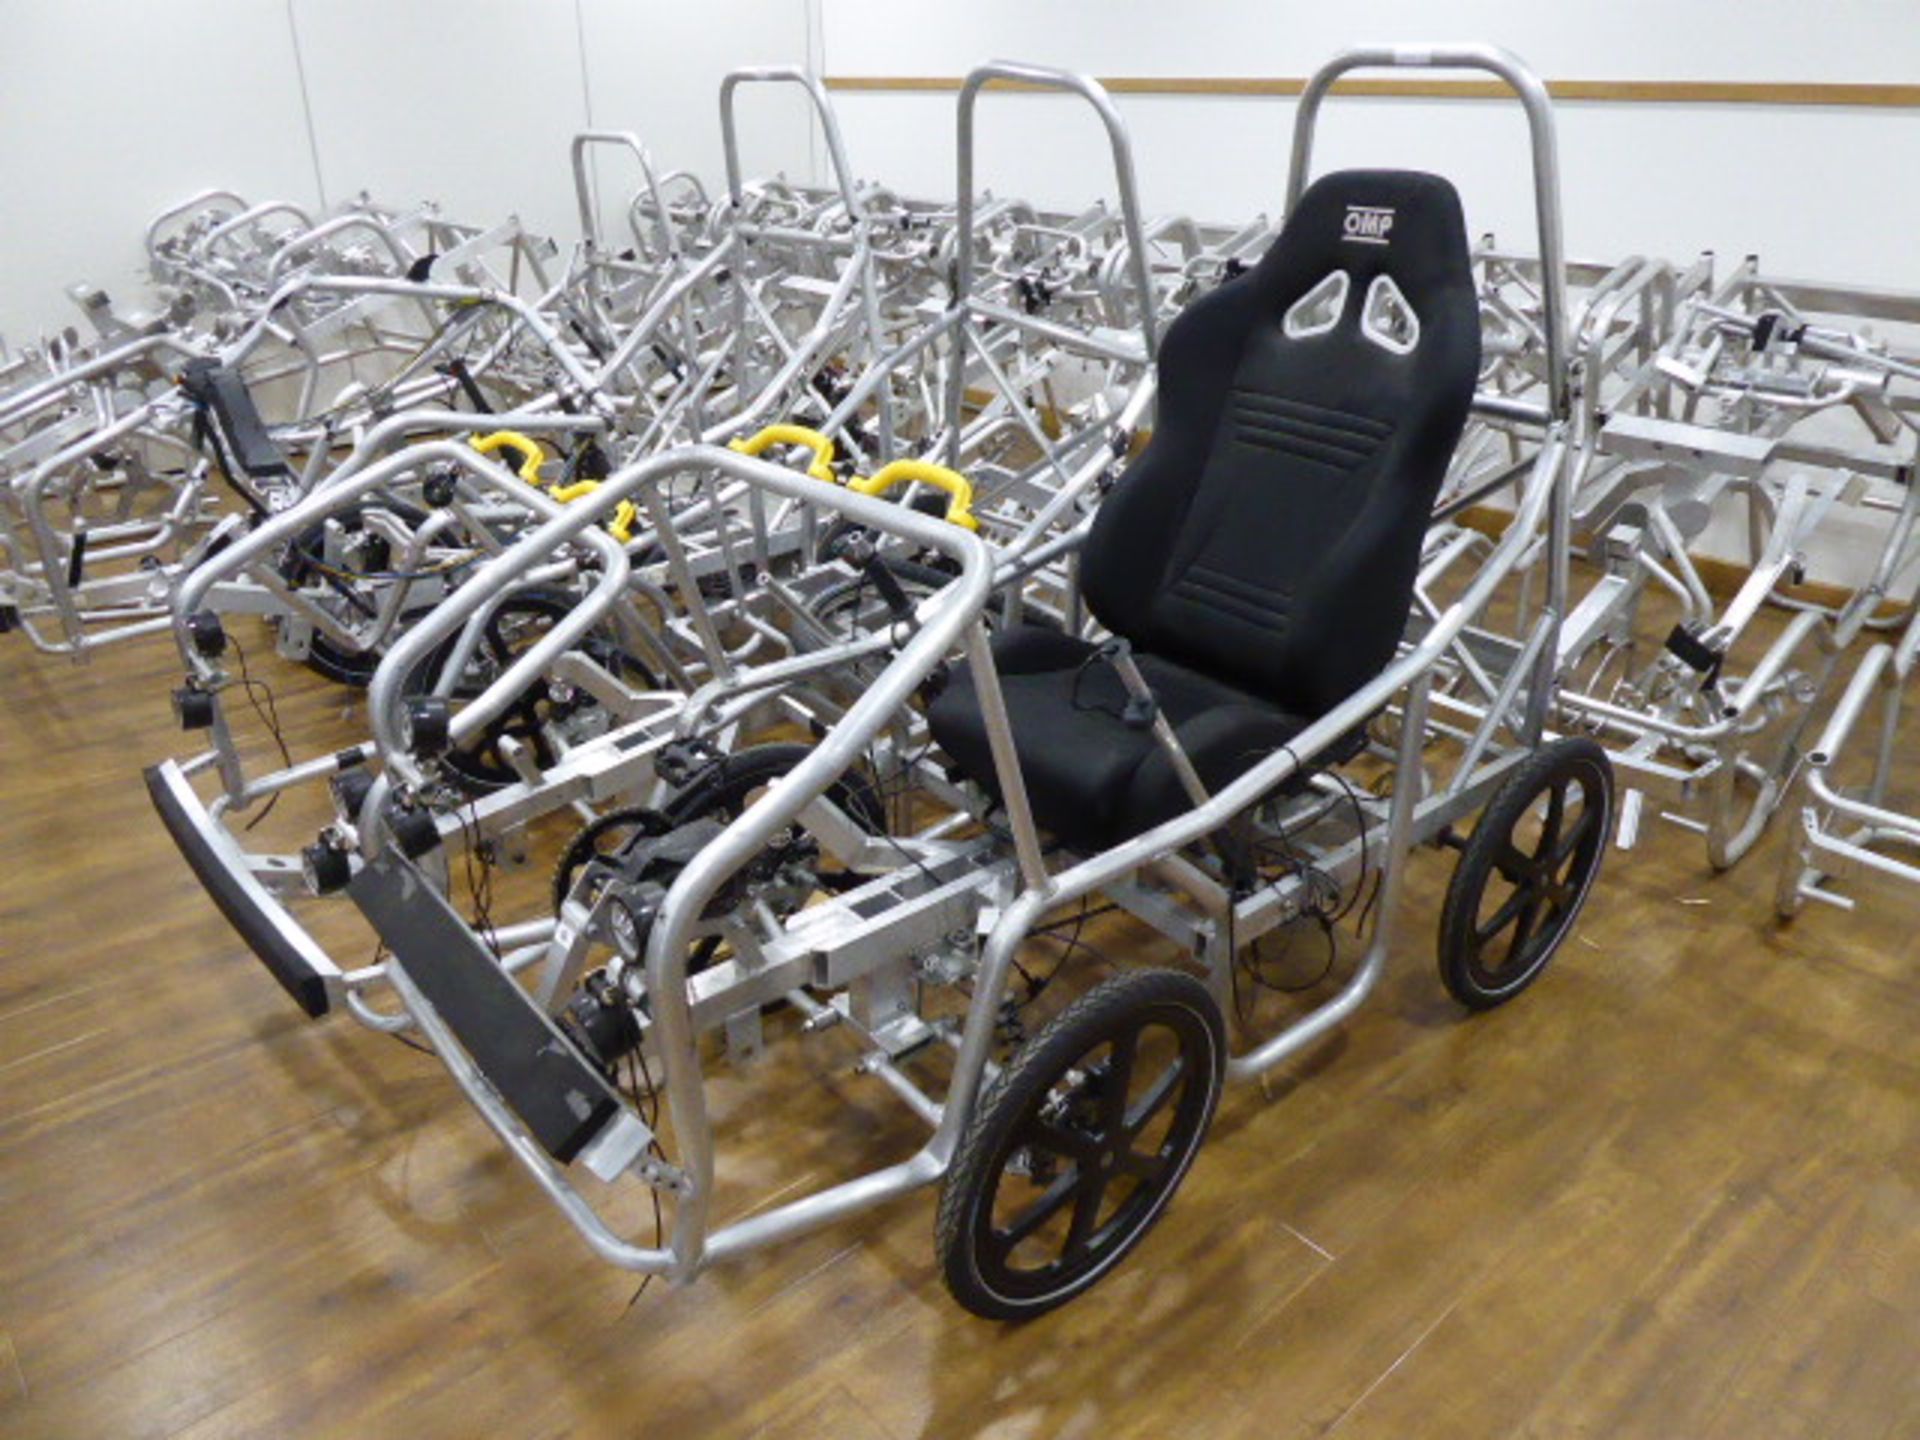 Incomplete DryCycle electric assist pedal cycle aluminium frame, wheels, tyres, seat, and various